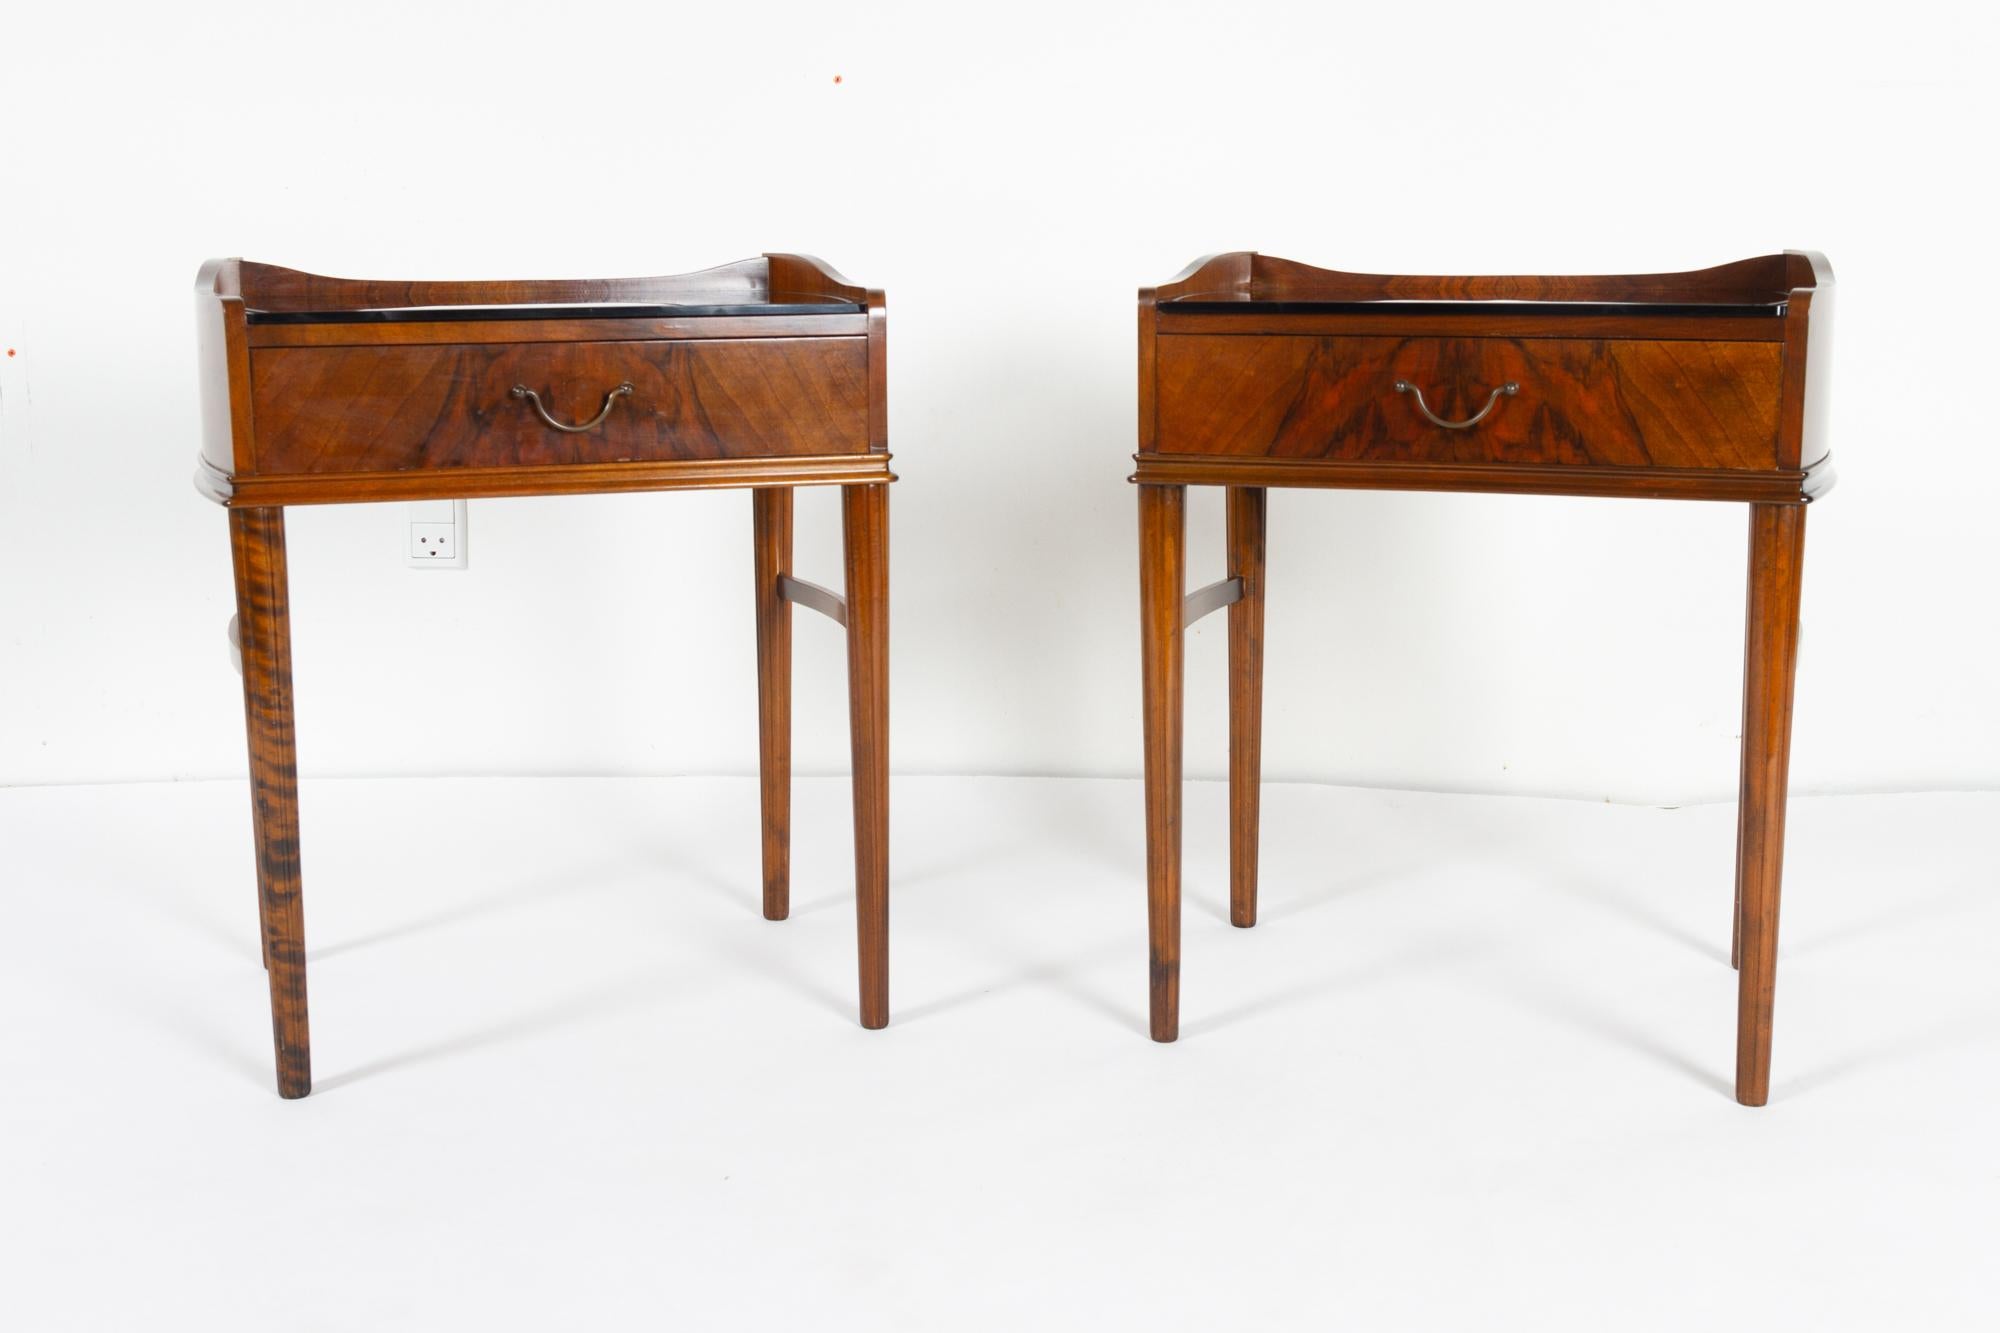 Pair of Danish walnut bedside tables, 1950s.
Two identical nightstands in walnut veneer with round tapered oak legs. Top in black glass with etching. Drawer with brass pull.
Very light and elegant.
Good vintage condition.